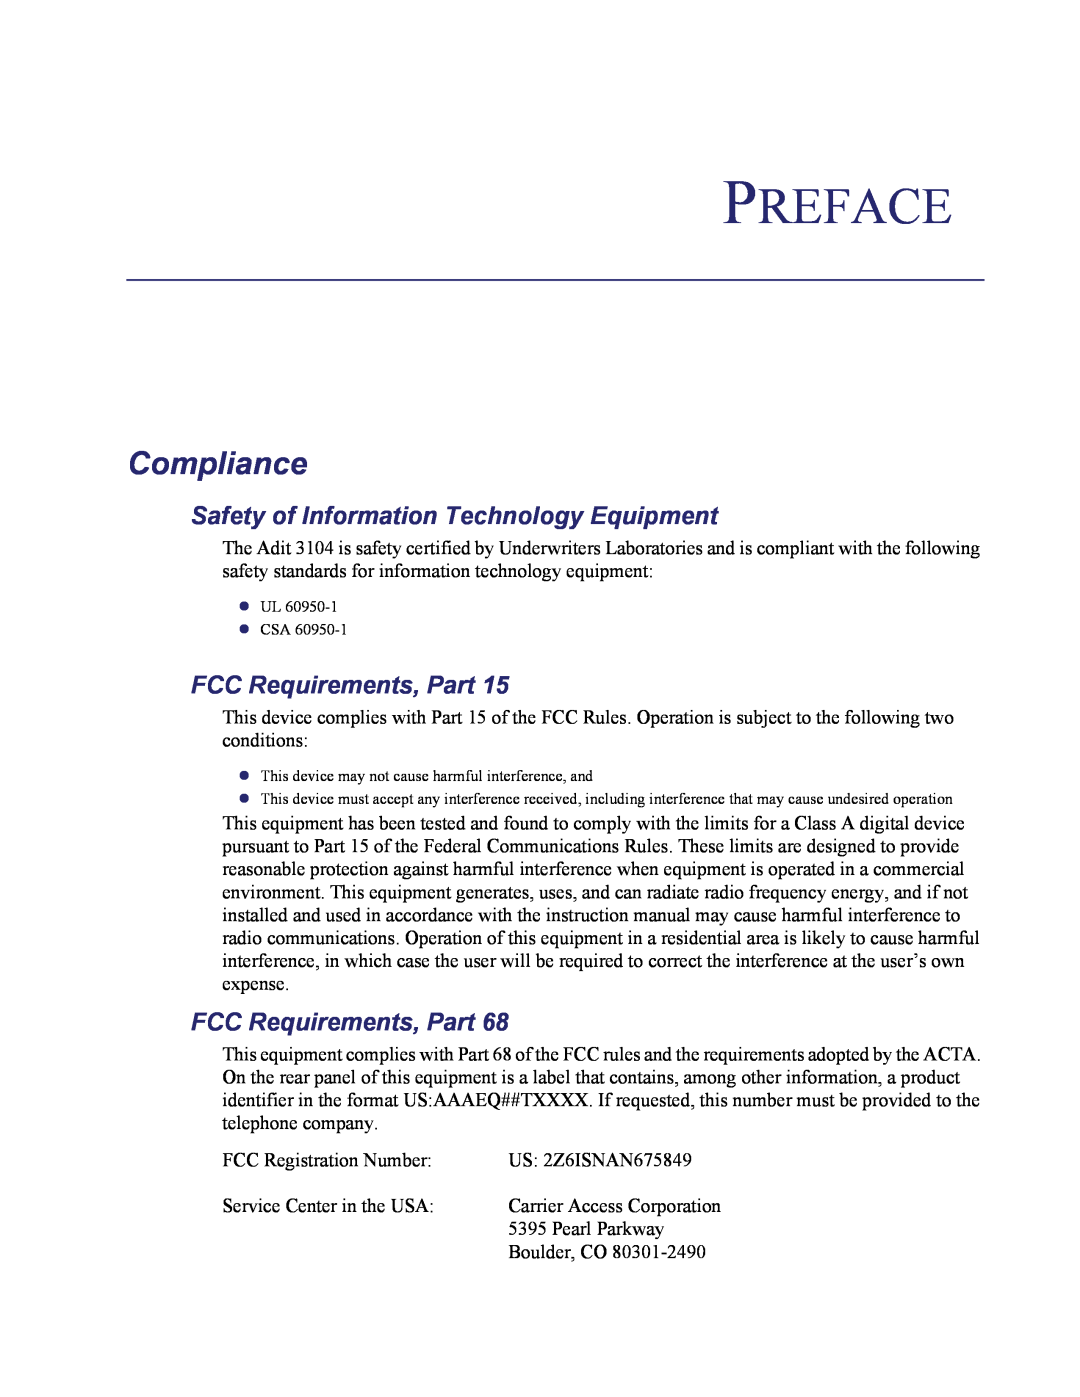 Carrier Access Adit 3104 Preface, Compliance, Safety of Information Technology Equipment, FCC Requirements, Part 